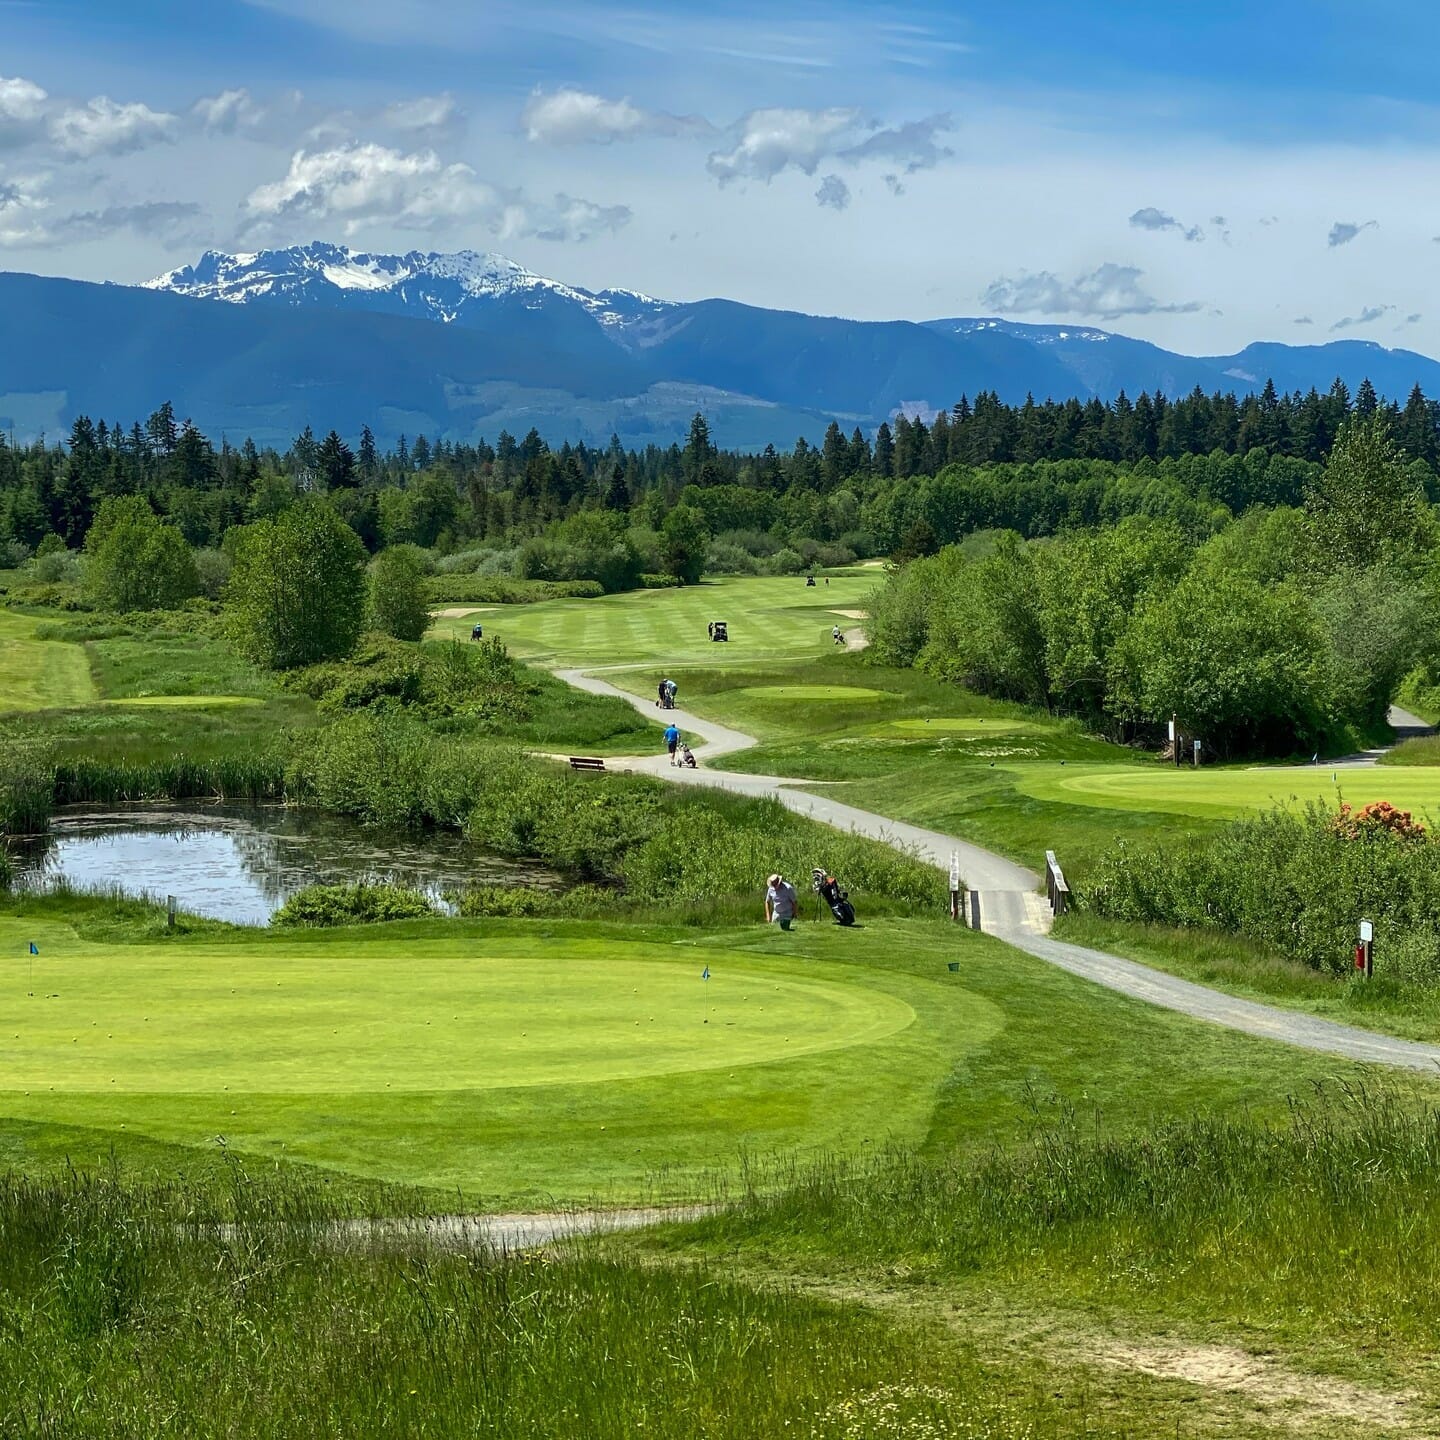 Pheasant Glen Golf Resort with mountains in the background